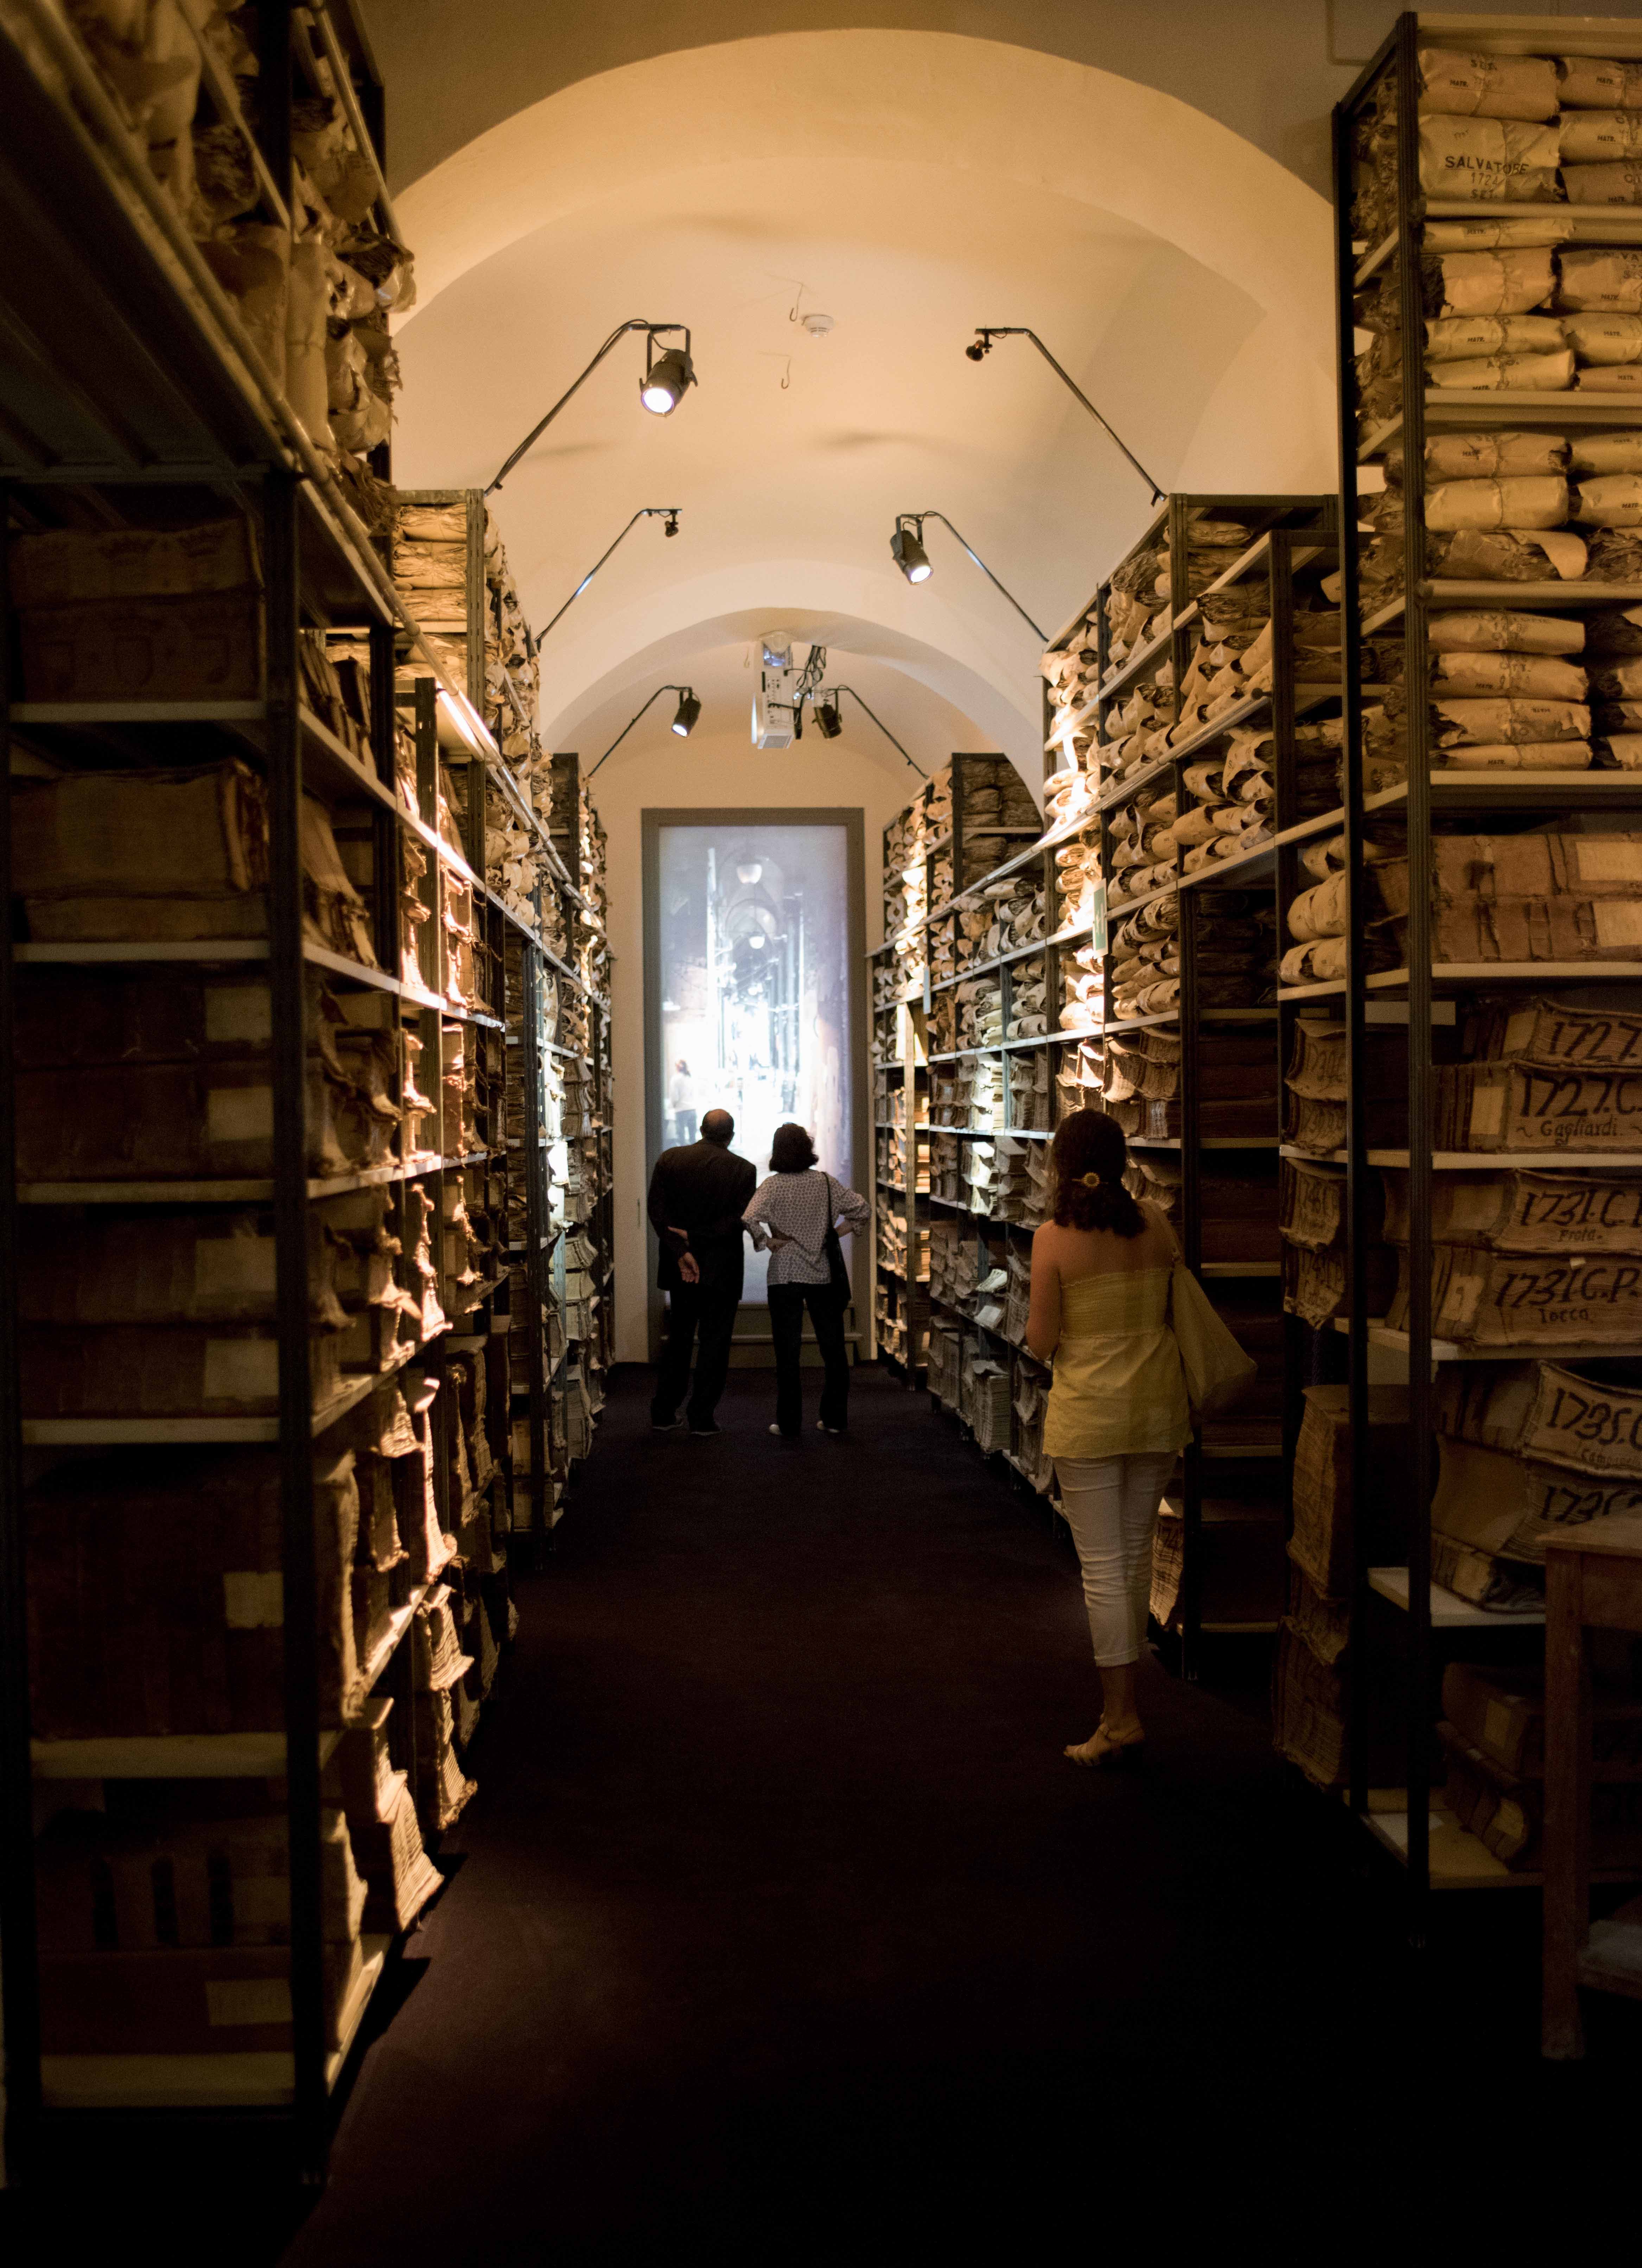 Image 'ilCartastorie: Storytelling in the archives'